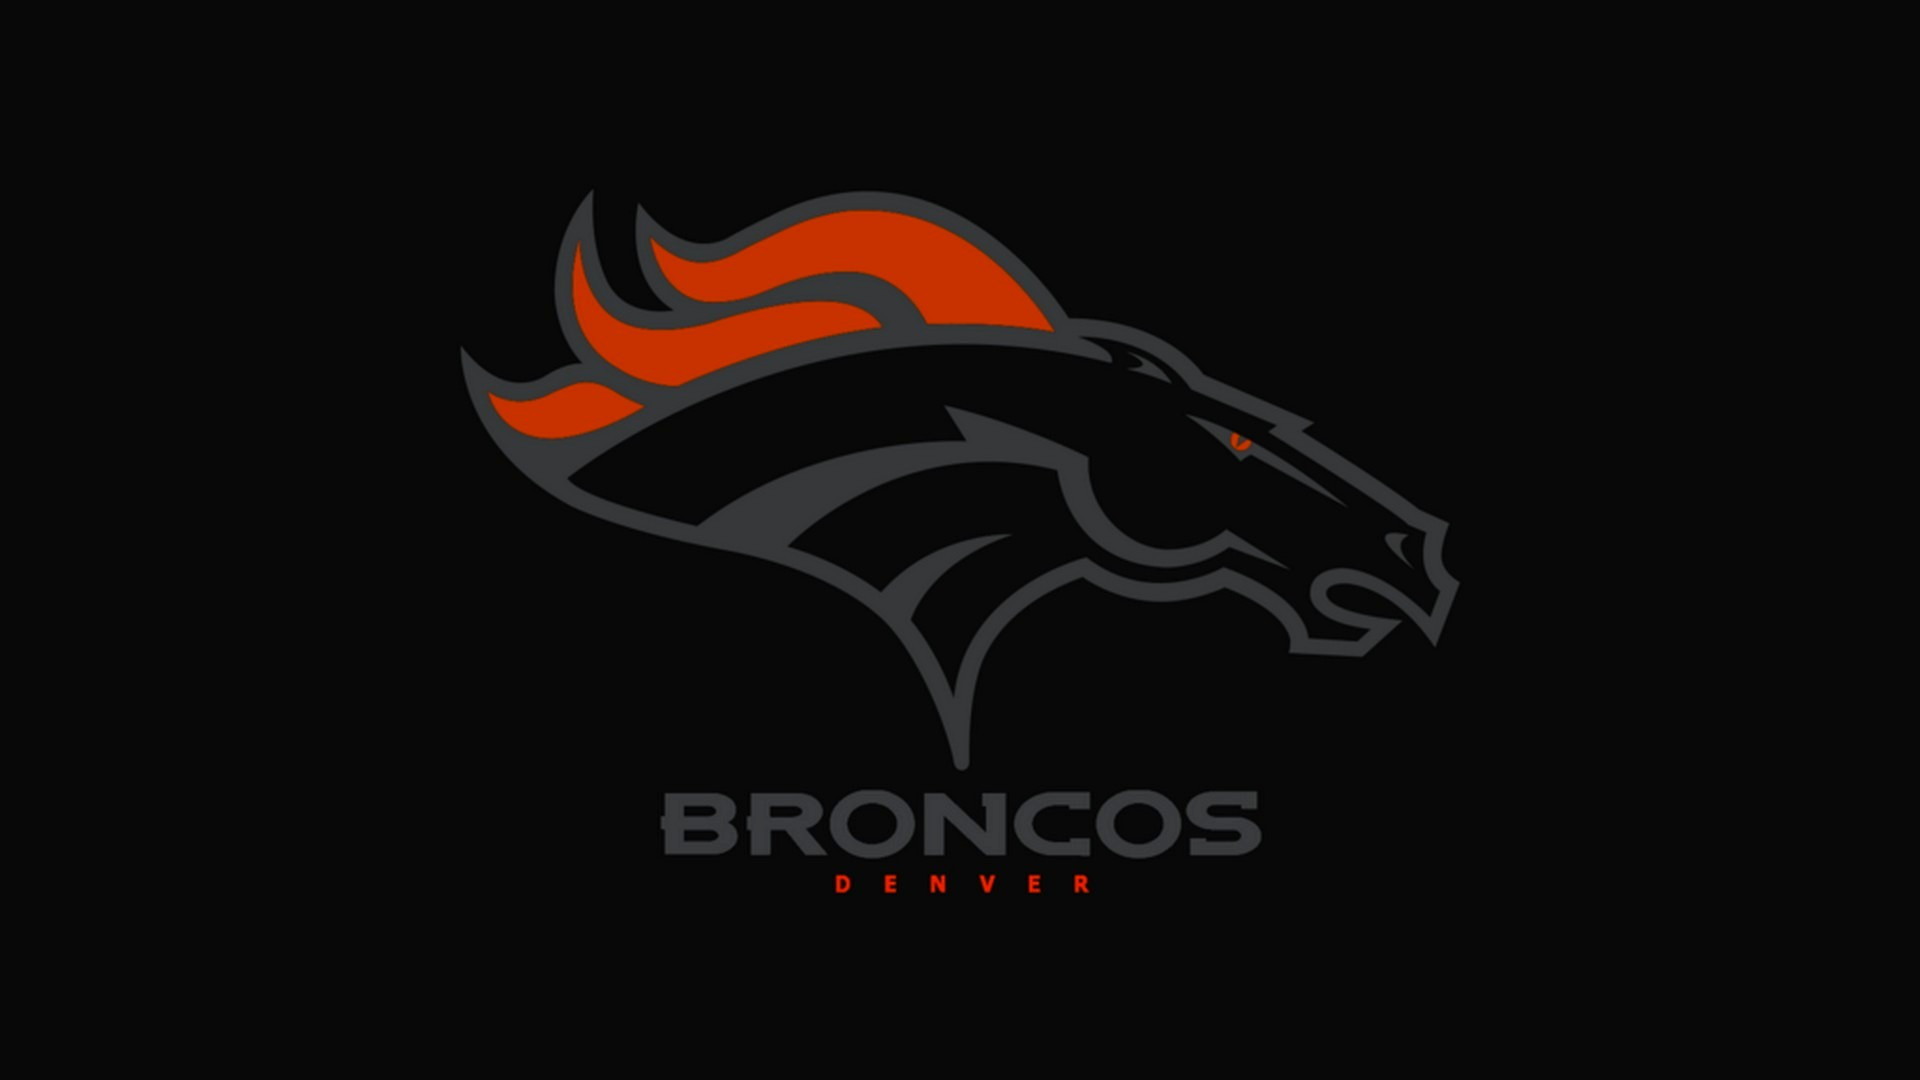 Denver Broncos Macbook Backgrounds with high-resolution 1920x1080 pixel. You can use and set as wallpaper for Notebook Screensavers, Mac Wallpapers, Mobile Home Screen, iPhone or Android Phones Lock Screen